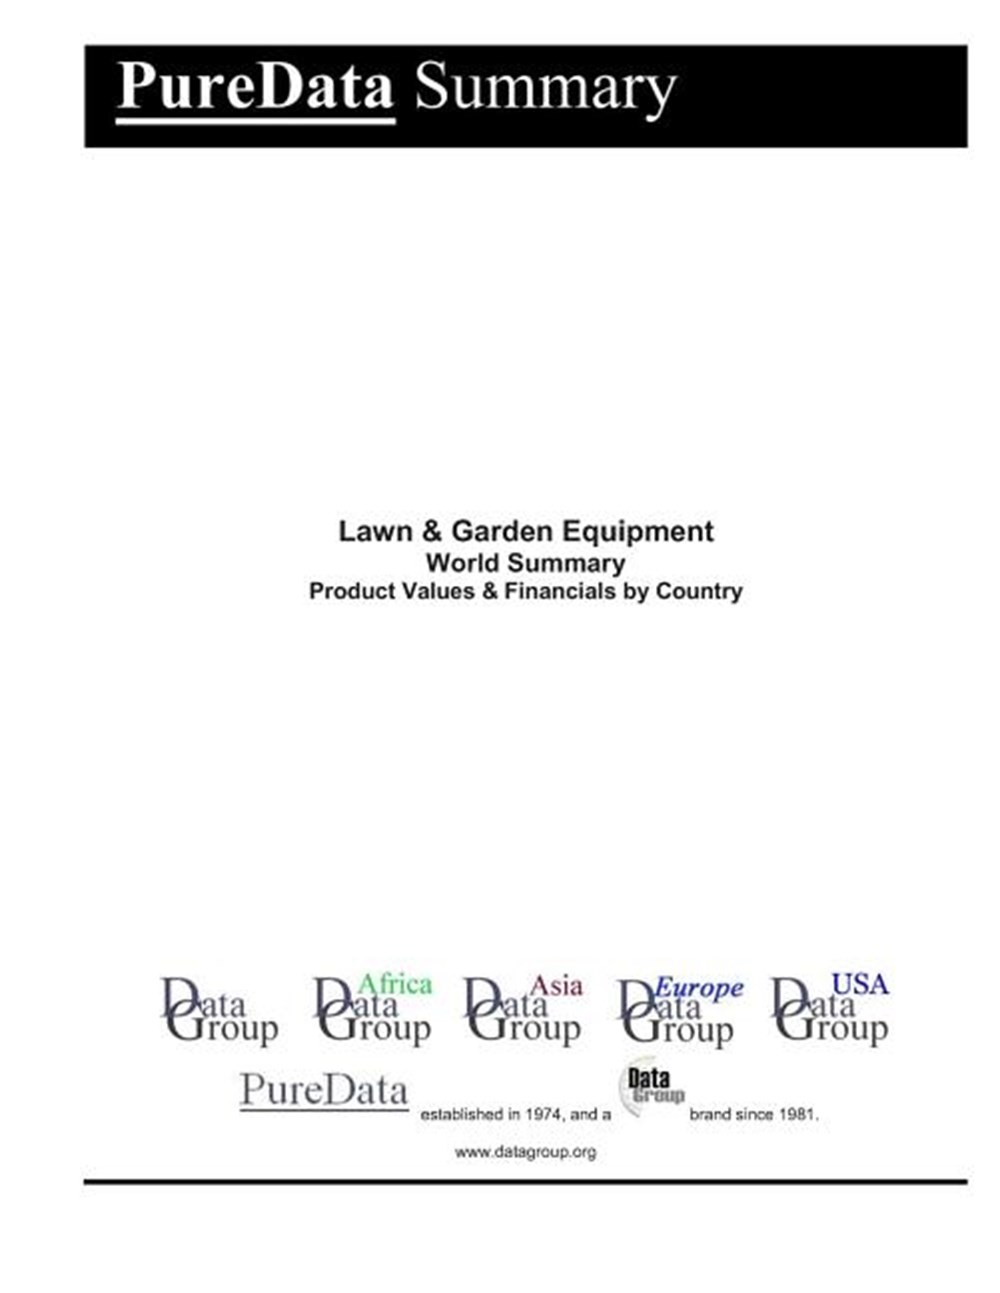 Lawn & Garden Equipment World Summary Product Values & Financials by Country